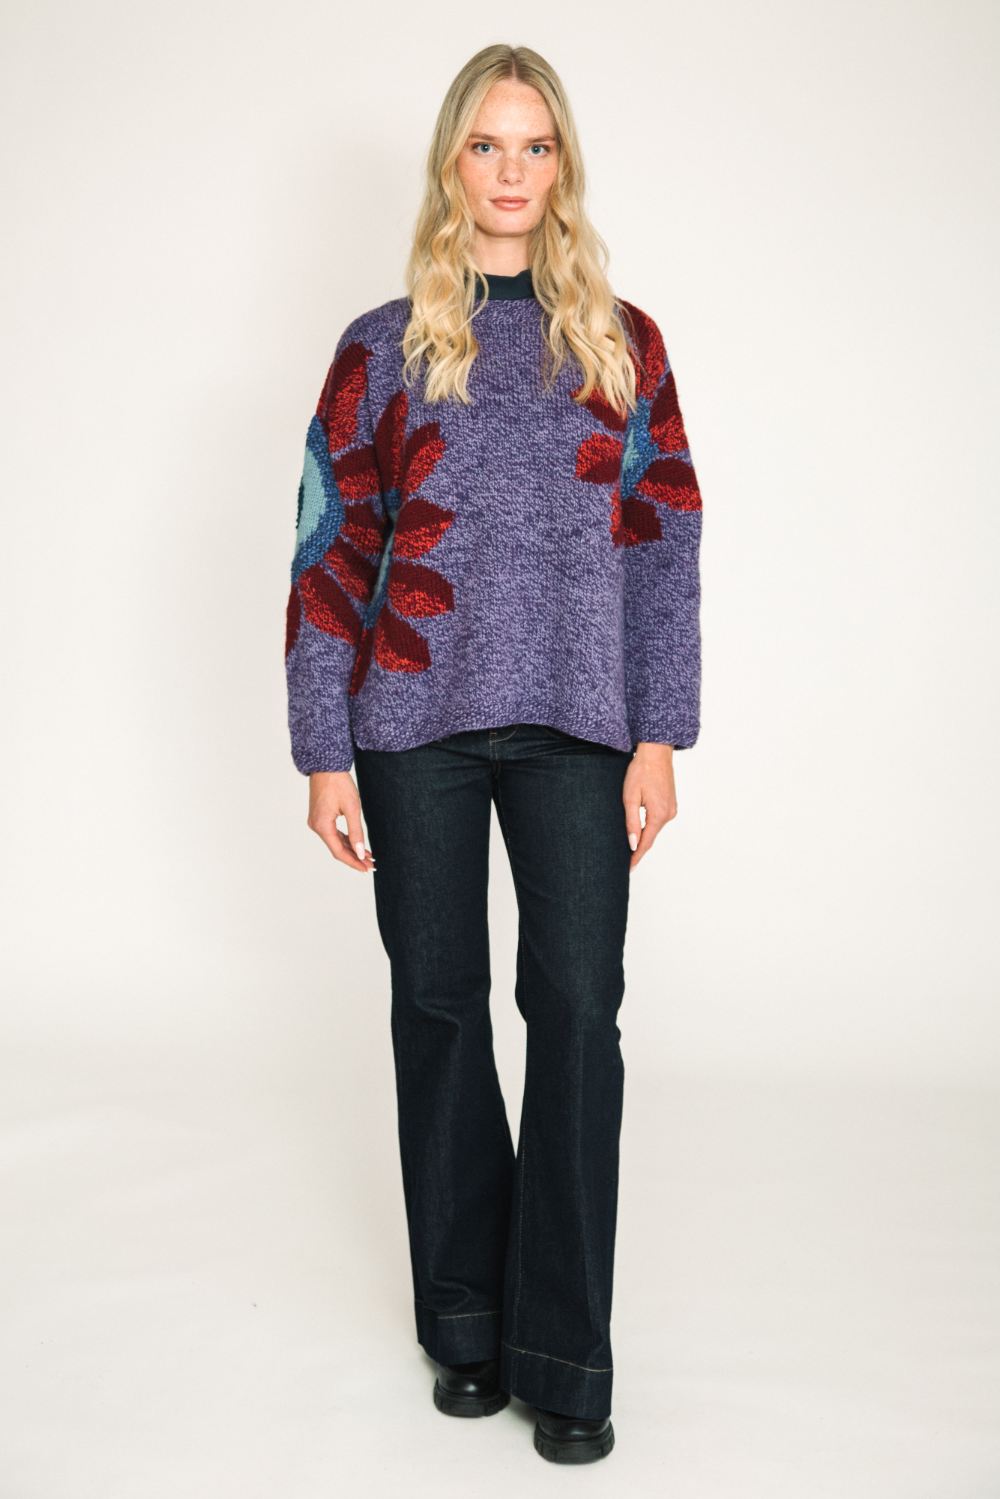 amano sunflower wool jumper in purple with red womens hand knit sweater